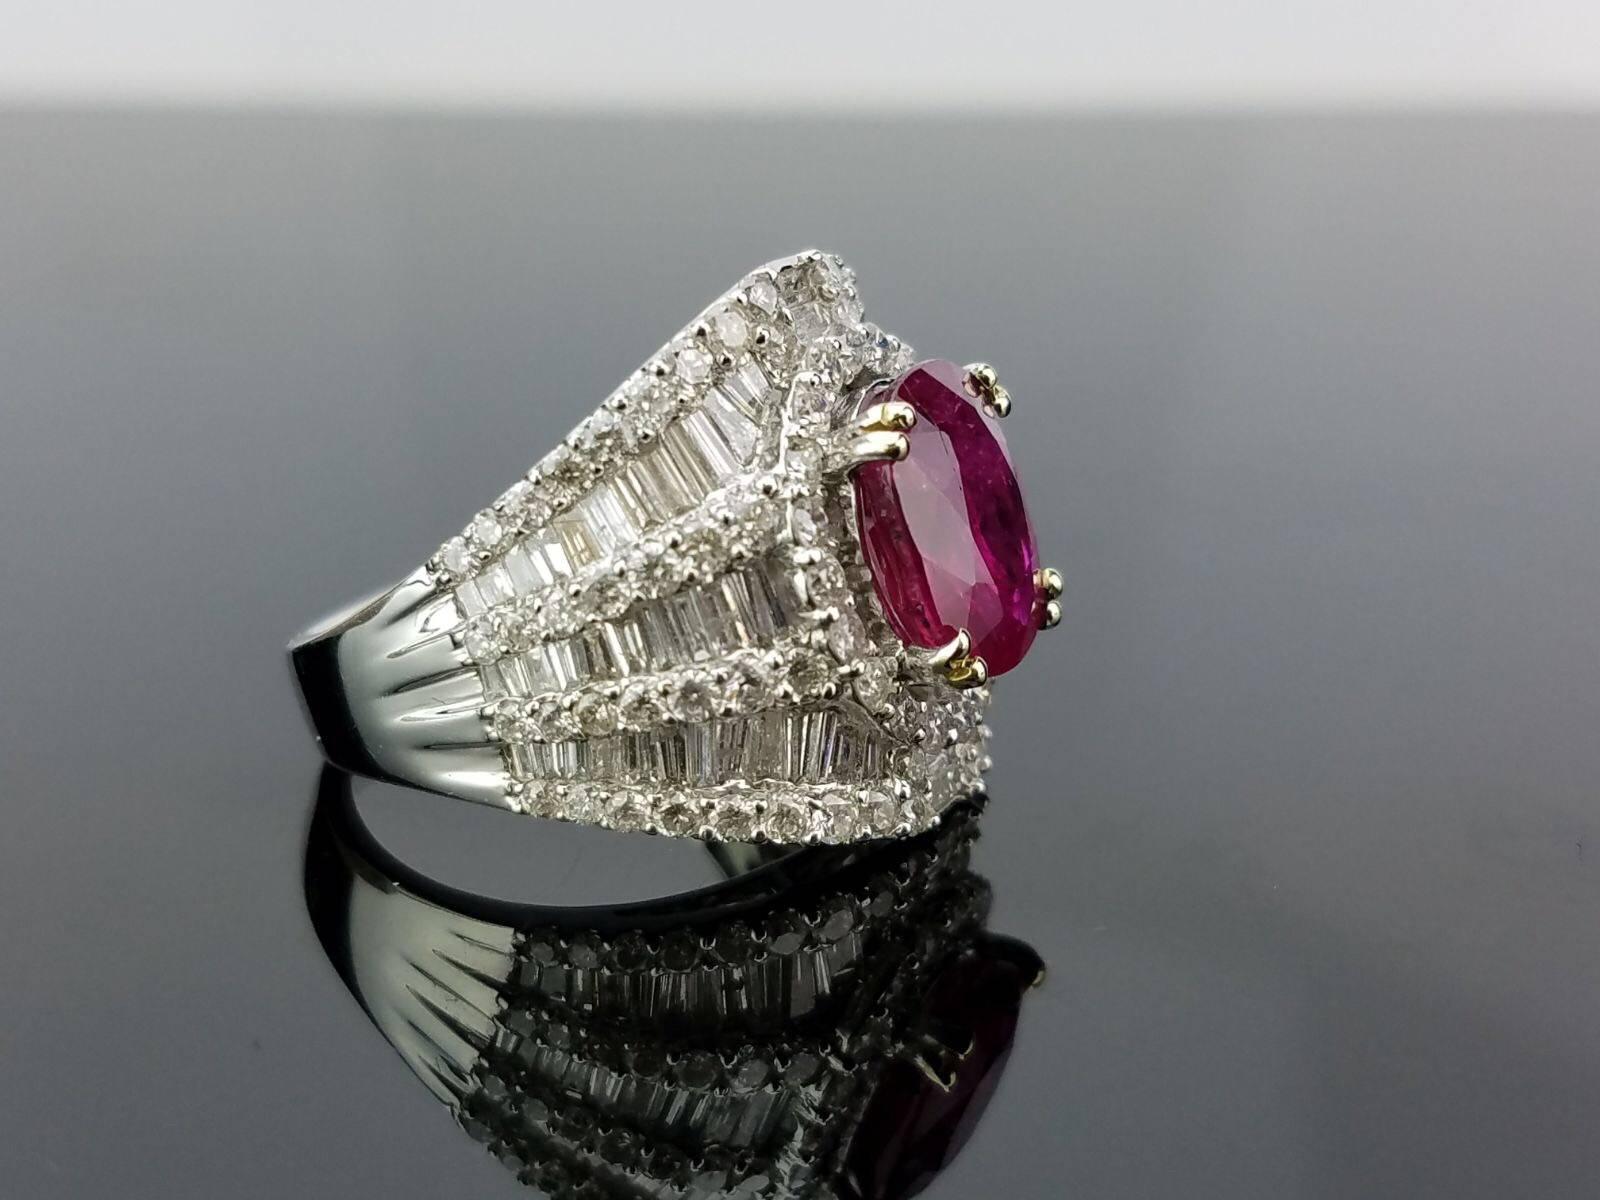 A beautiful, lustrous Ruby cocktail ring surrounded by baguettes and brilliant cut white diamonds, all set in 18K white gold.

Stone Details: 
Stone: Ruby
Carat Weight: 3.58 Carat

Diamond Details: 
Total Carat Weight: 2.91 carat
Quality: VS/SI ,